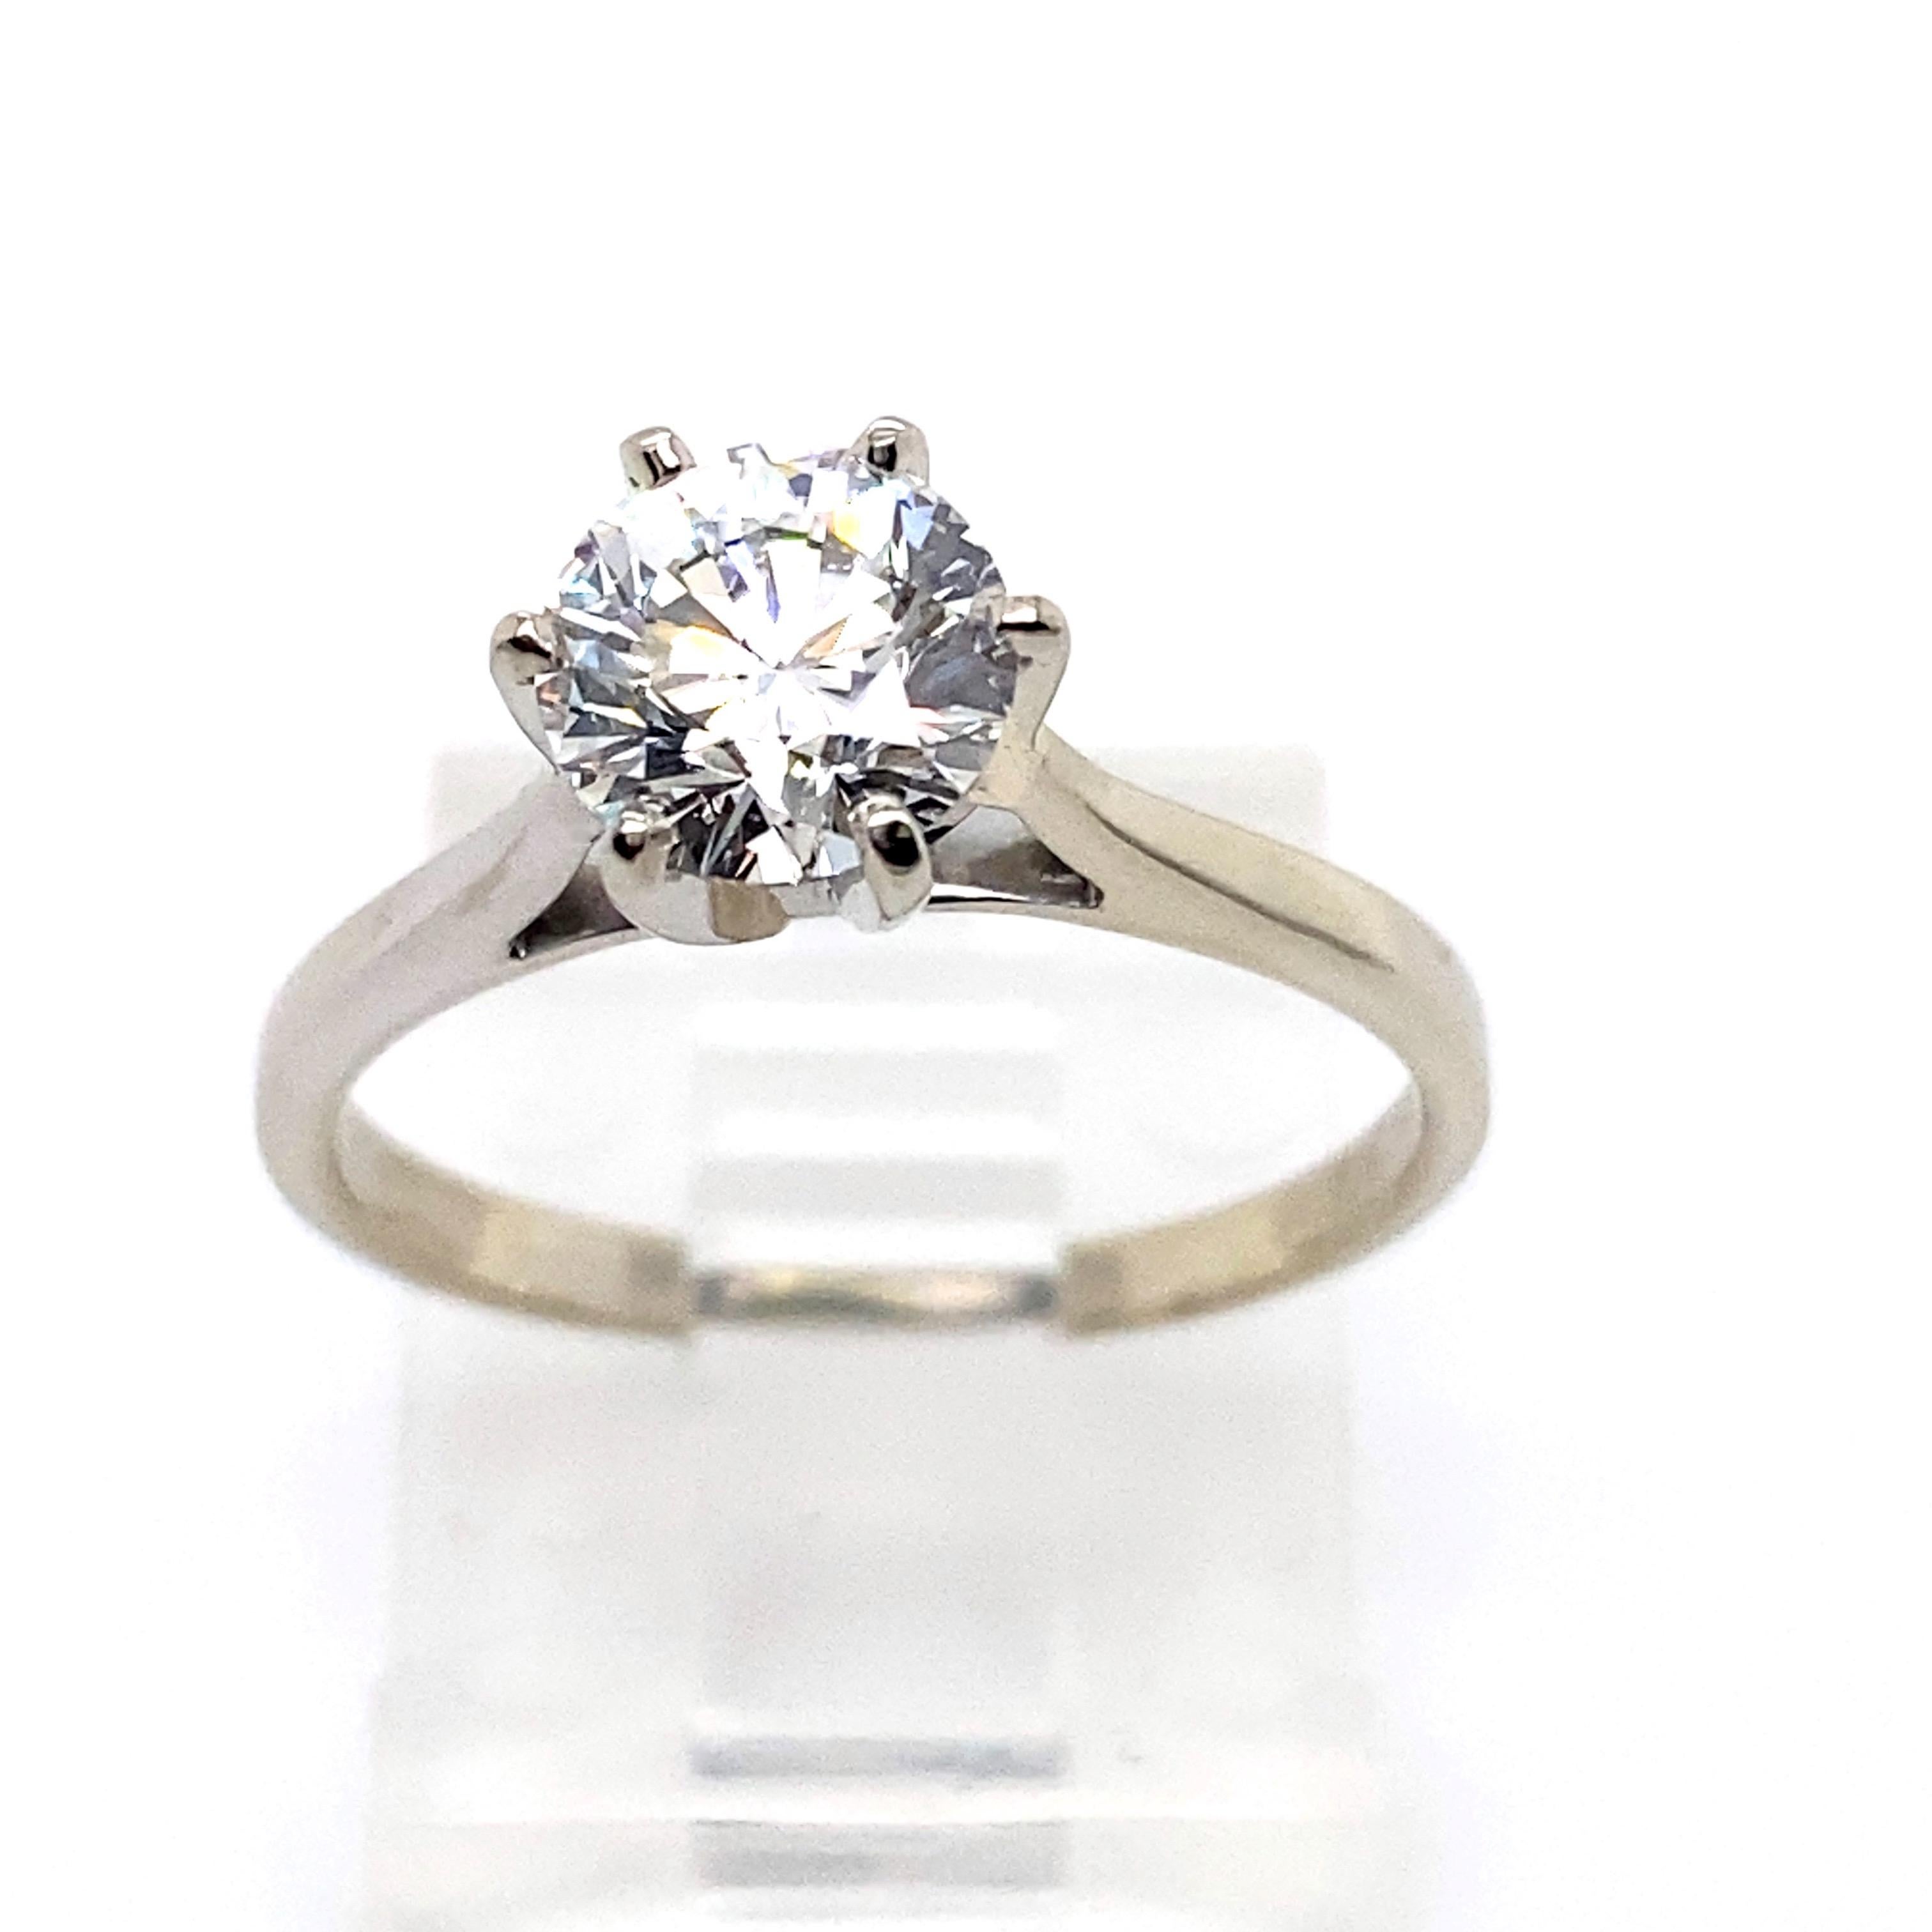 LAZARE KAPLAN Round Brilliant Diamond Solitaire Engagement Ring 
Style:  6-Prong Solitaire
GIA Diamond Certificate:  6137638802
Metal:  14kt White Gold
Size:  6.25 sizable
TCW:  1.00 cts
Main Diamond:  Round Brilliant Diamond 1.00 cts
Color &